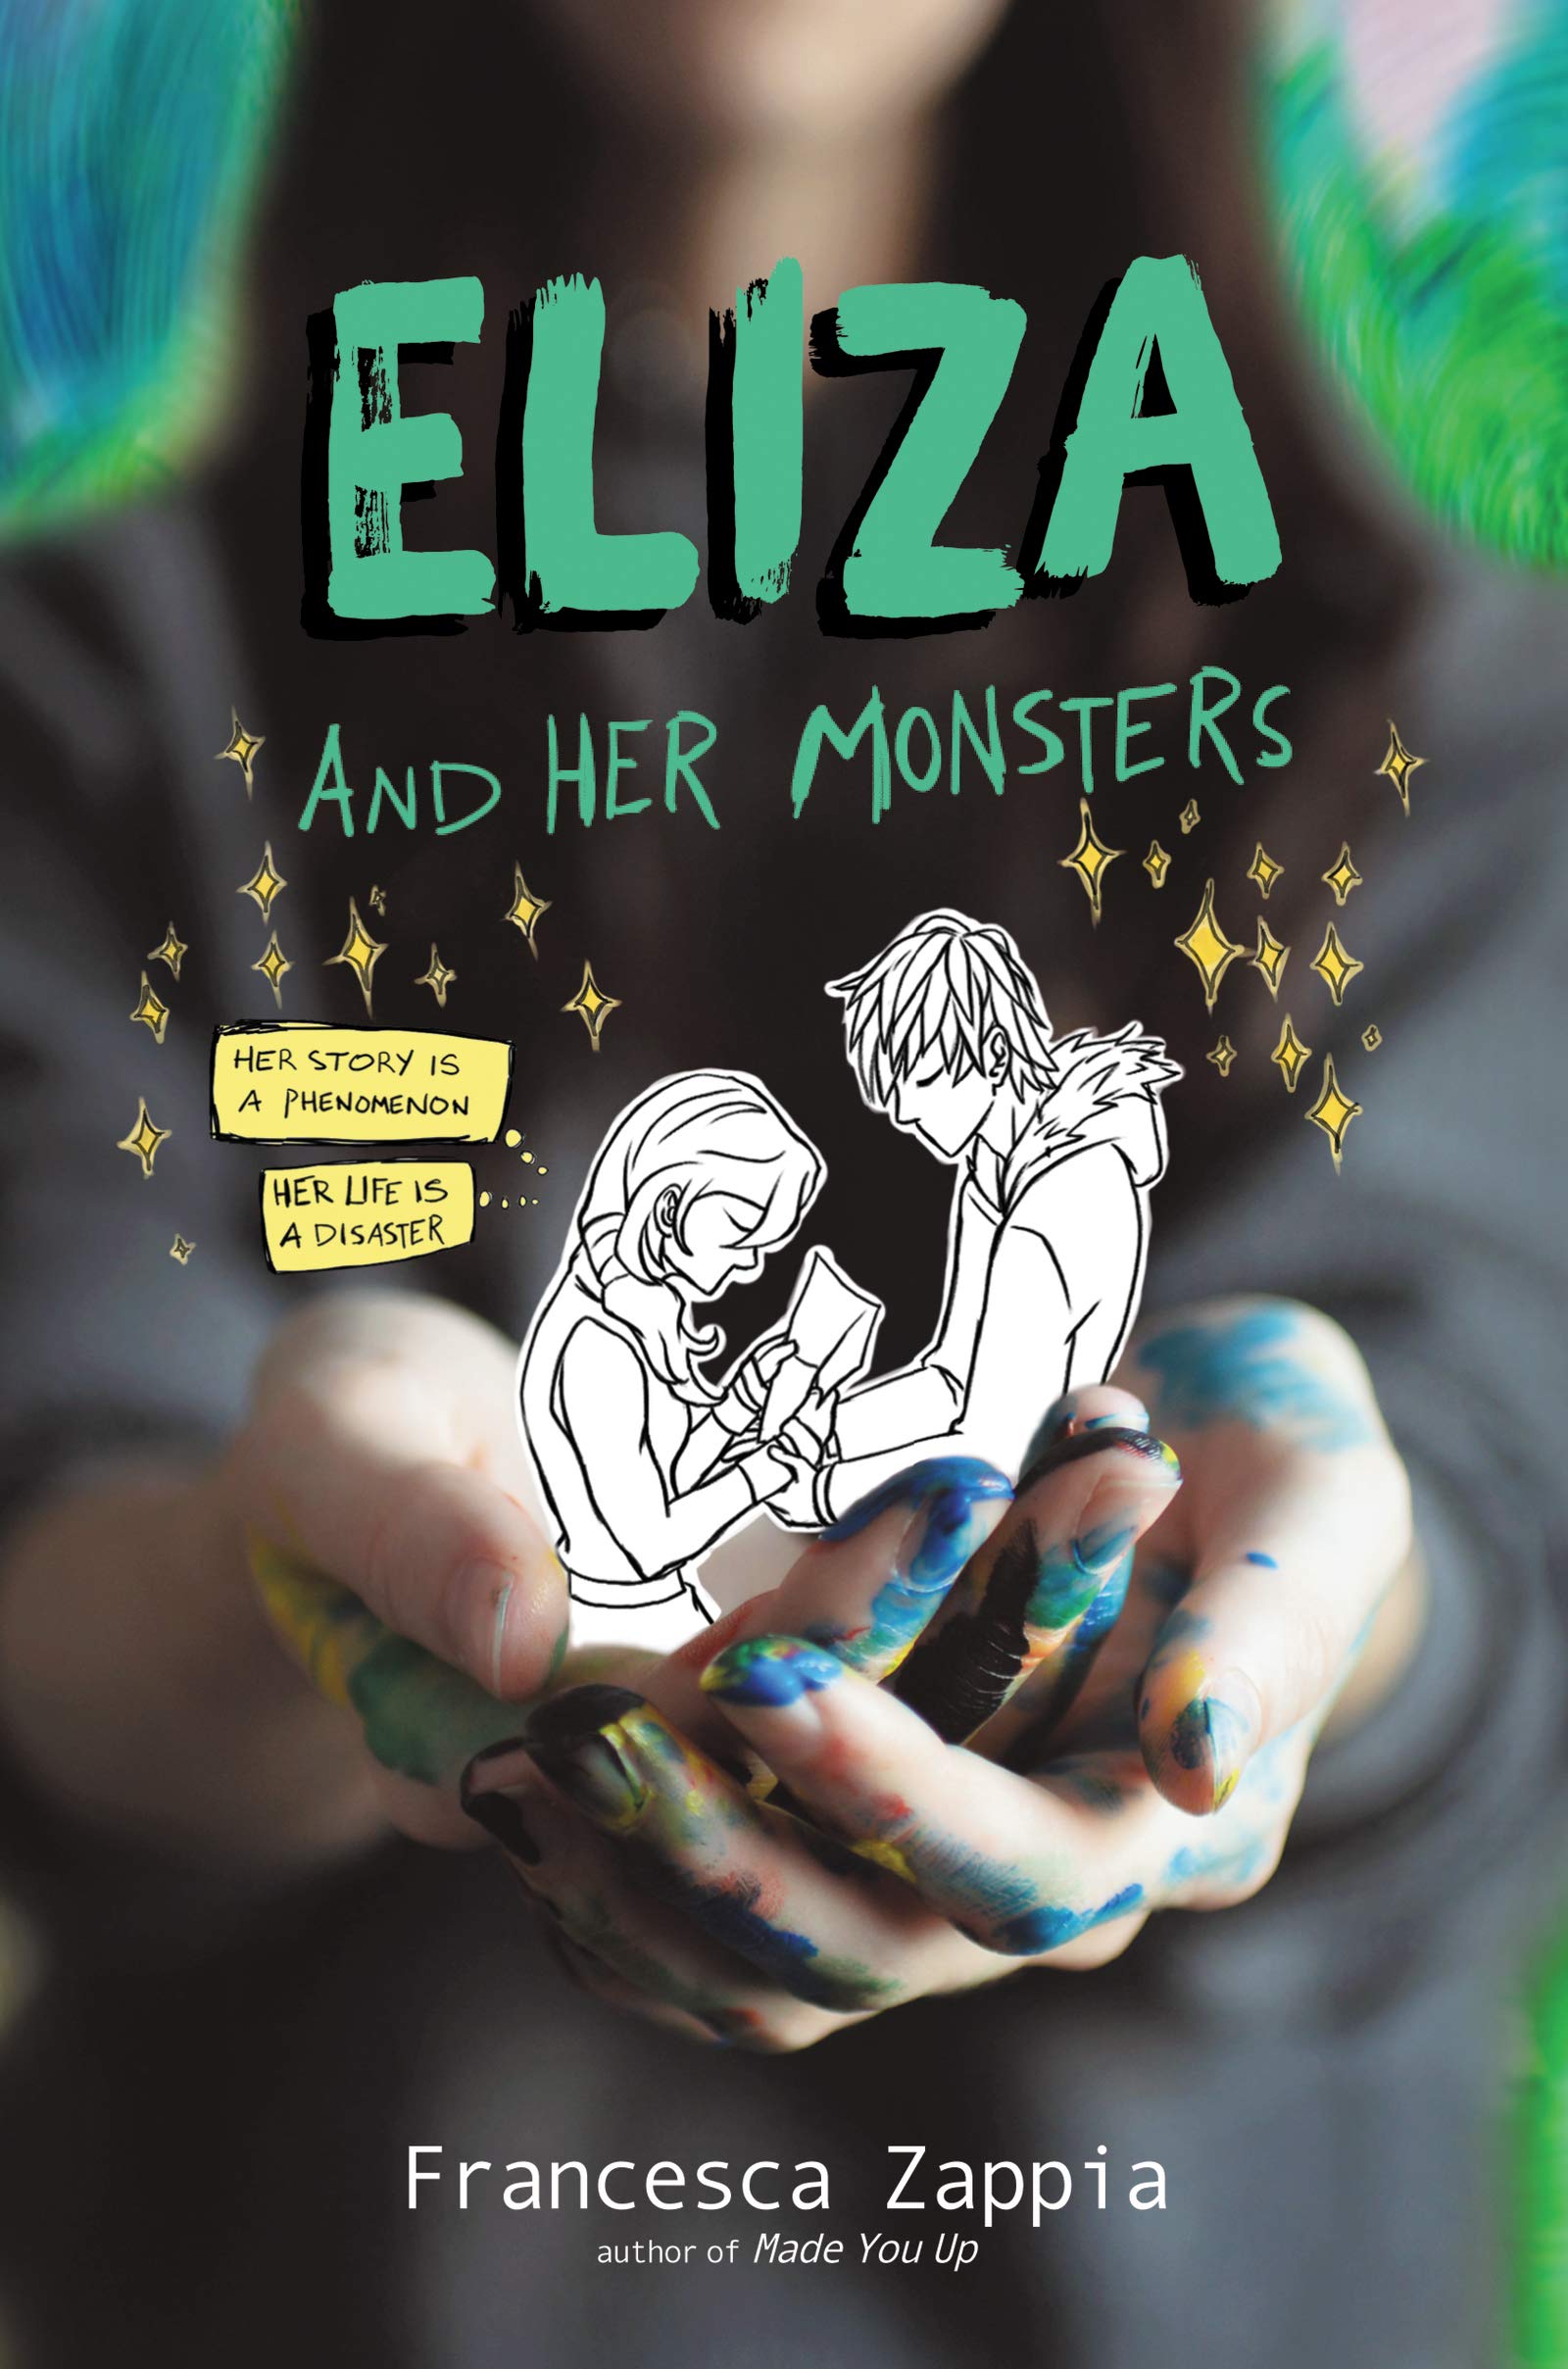 Zappia, Francesca. Eliza and her Monsters. Green Willow Books, 2017.